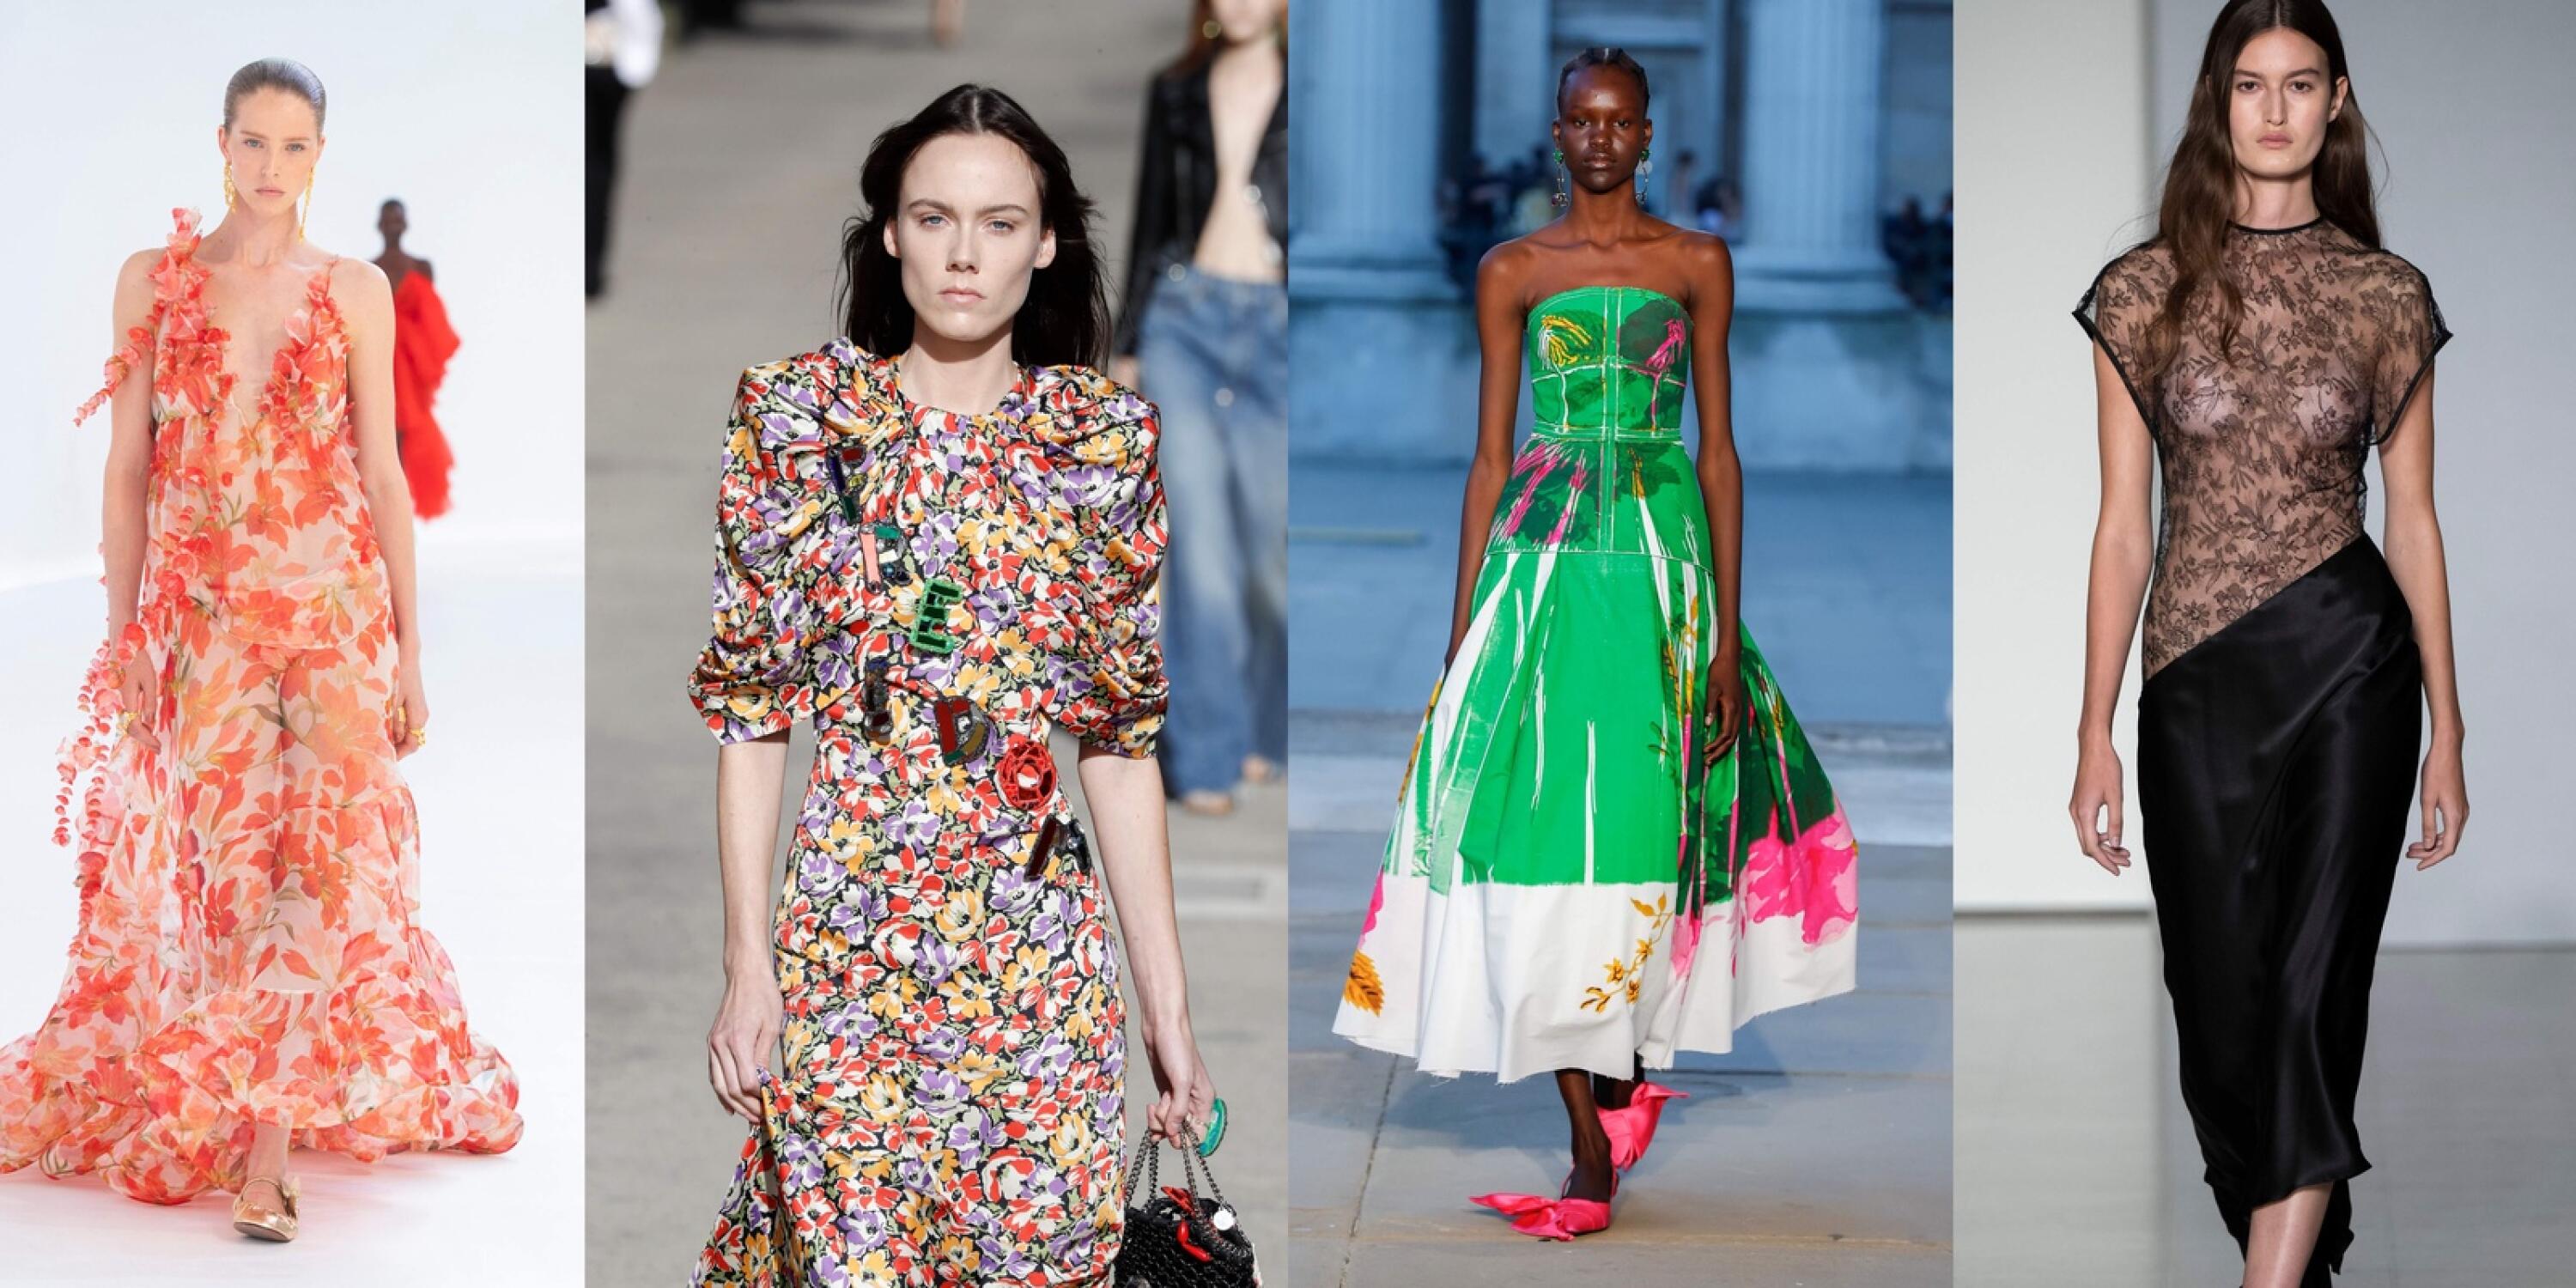 5 new womenswear trends you need to know | Business Post